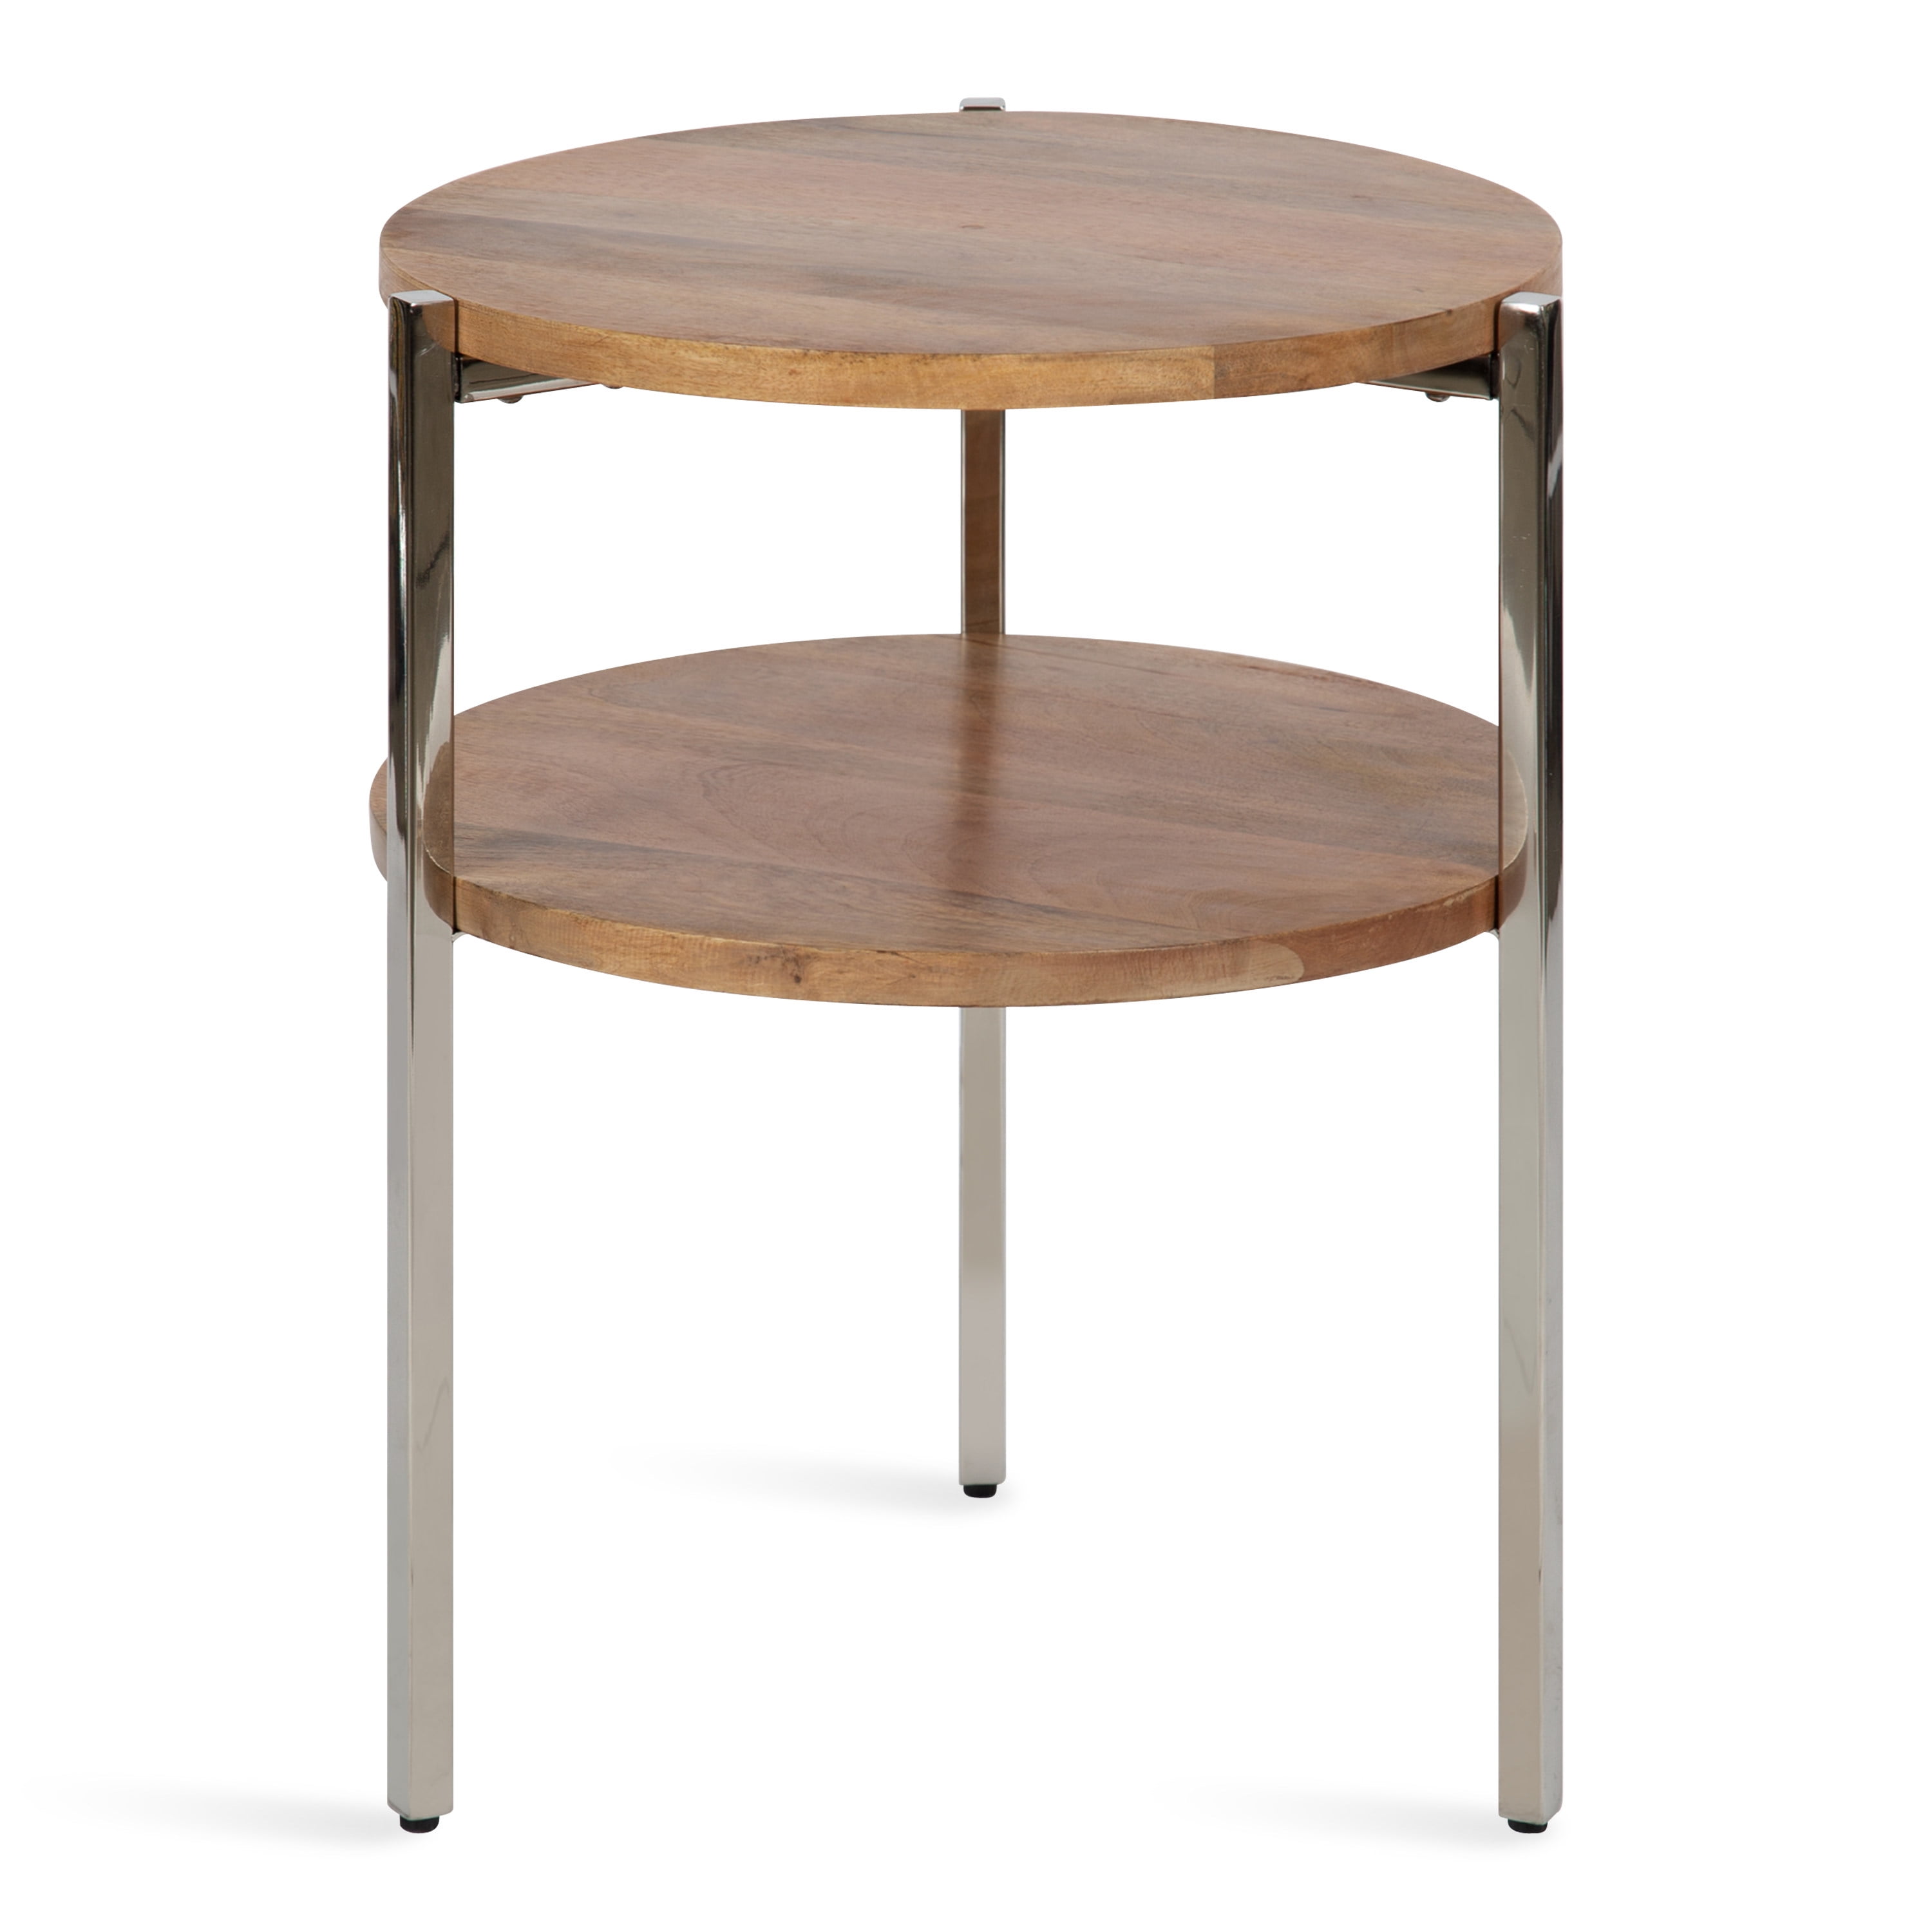 Kate and Laurel Lamaar Modern Round Side Table, 19 x 19 x 25, Natural Wood  and Silver, Chic End Table for Storage and Display